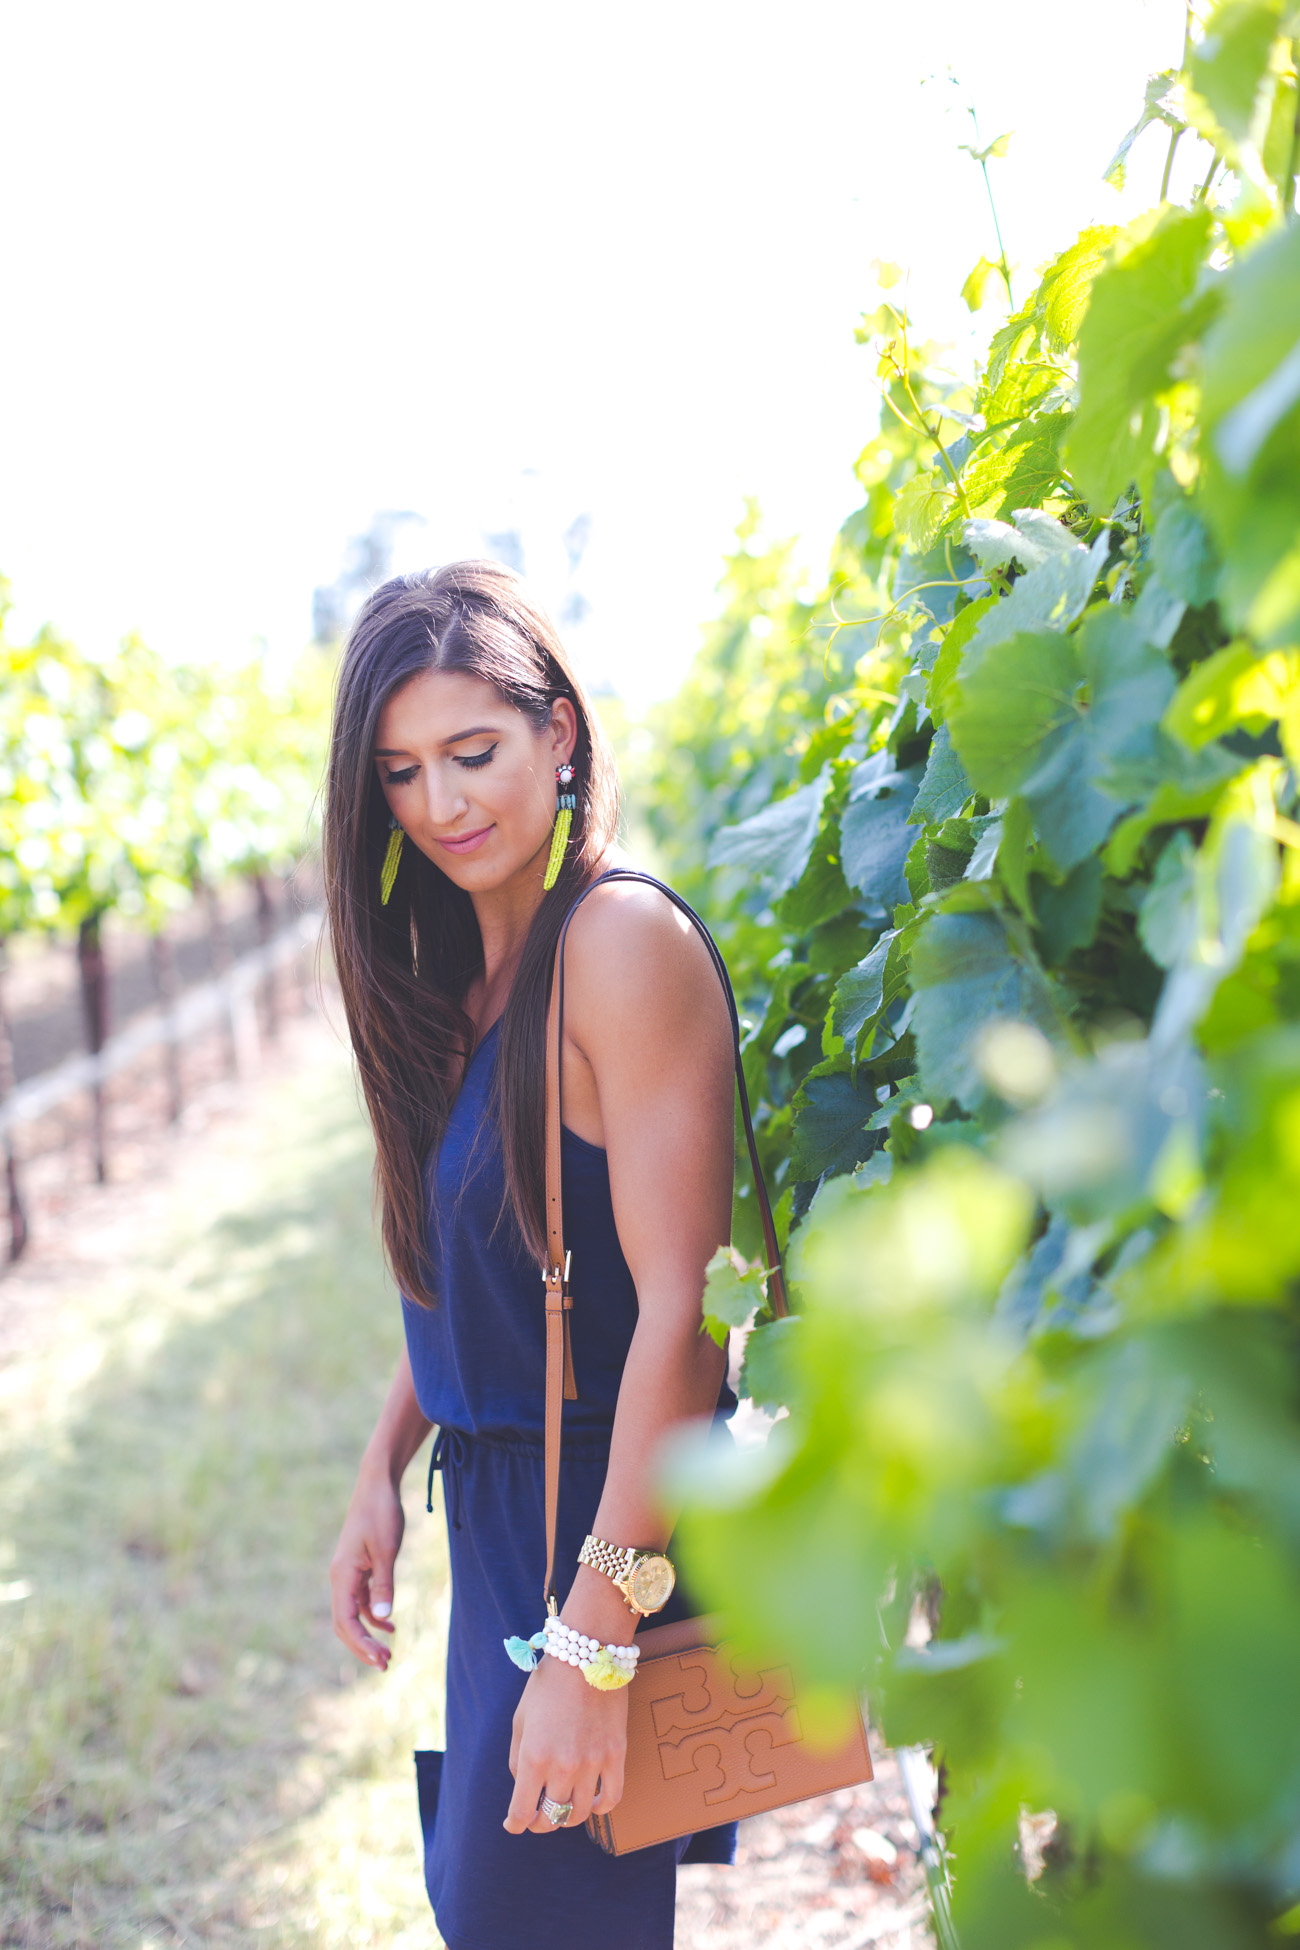 vineyards, wine tasting, best wineries in napa, trinitas winery, meritage resort and spa, wine country, napa valley, best places to stay in napa, best resorts in napa valley, top resorts in napa // grace wainwright a southern drawl